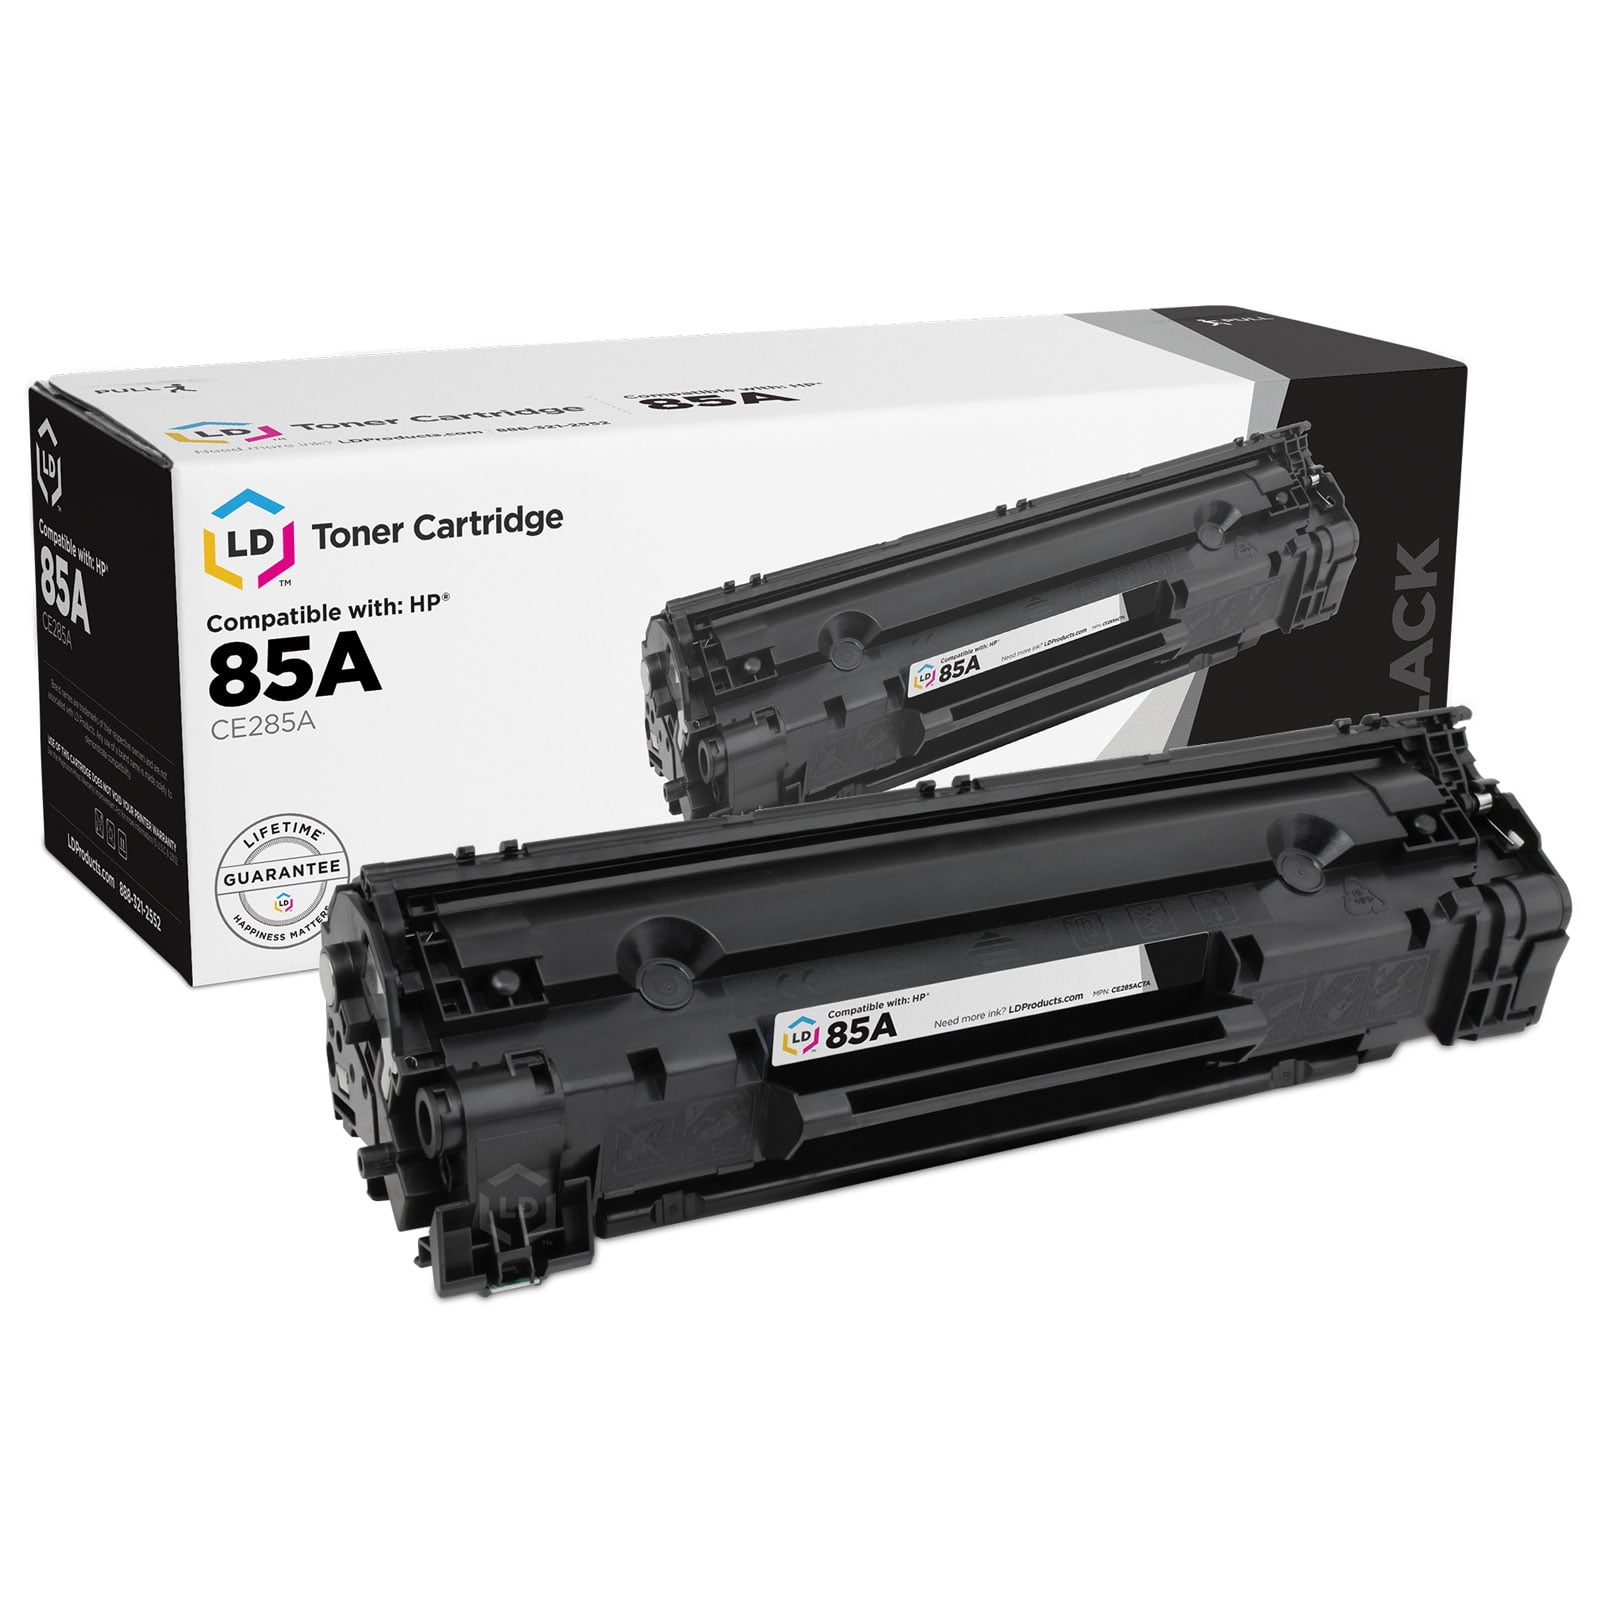 Compatible HP W1420A Toner Cartridge Best Quality HP 142A Laser Toner  Cartridge With Chip For HP LaserJet M110/ M110w/ M110we /HP LaserJet MFP  M139/M139we/ MFP M140w/MFP M140we - Shenzhen Ti-FAITH Technology Co.,Ltd.